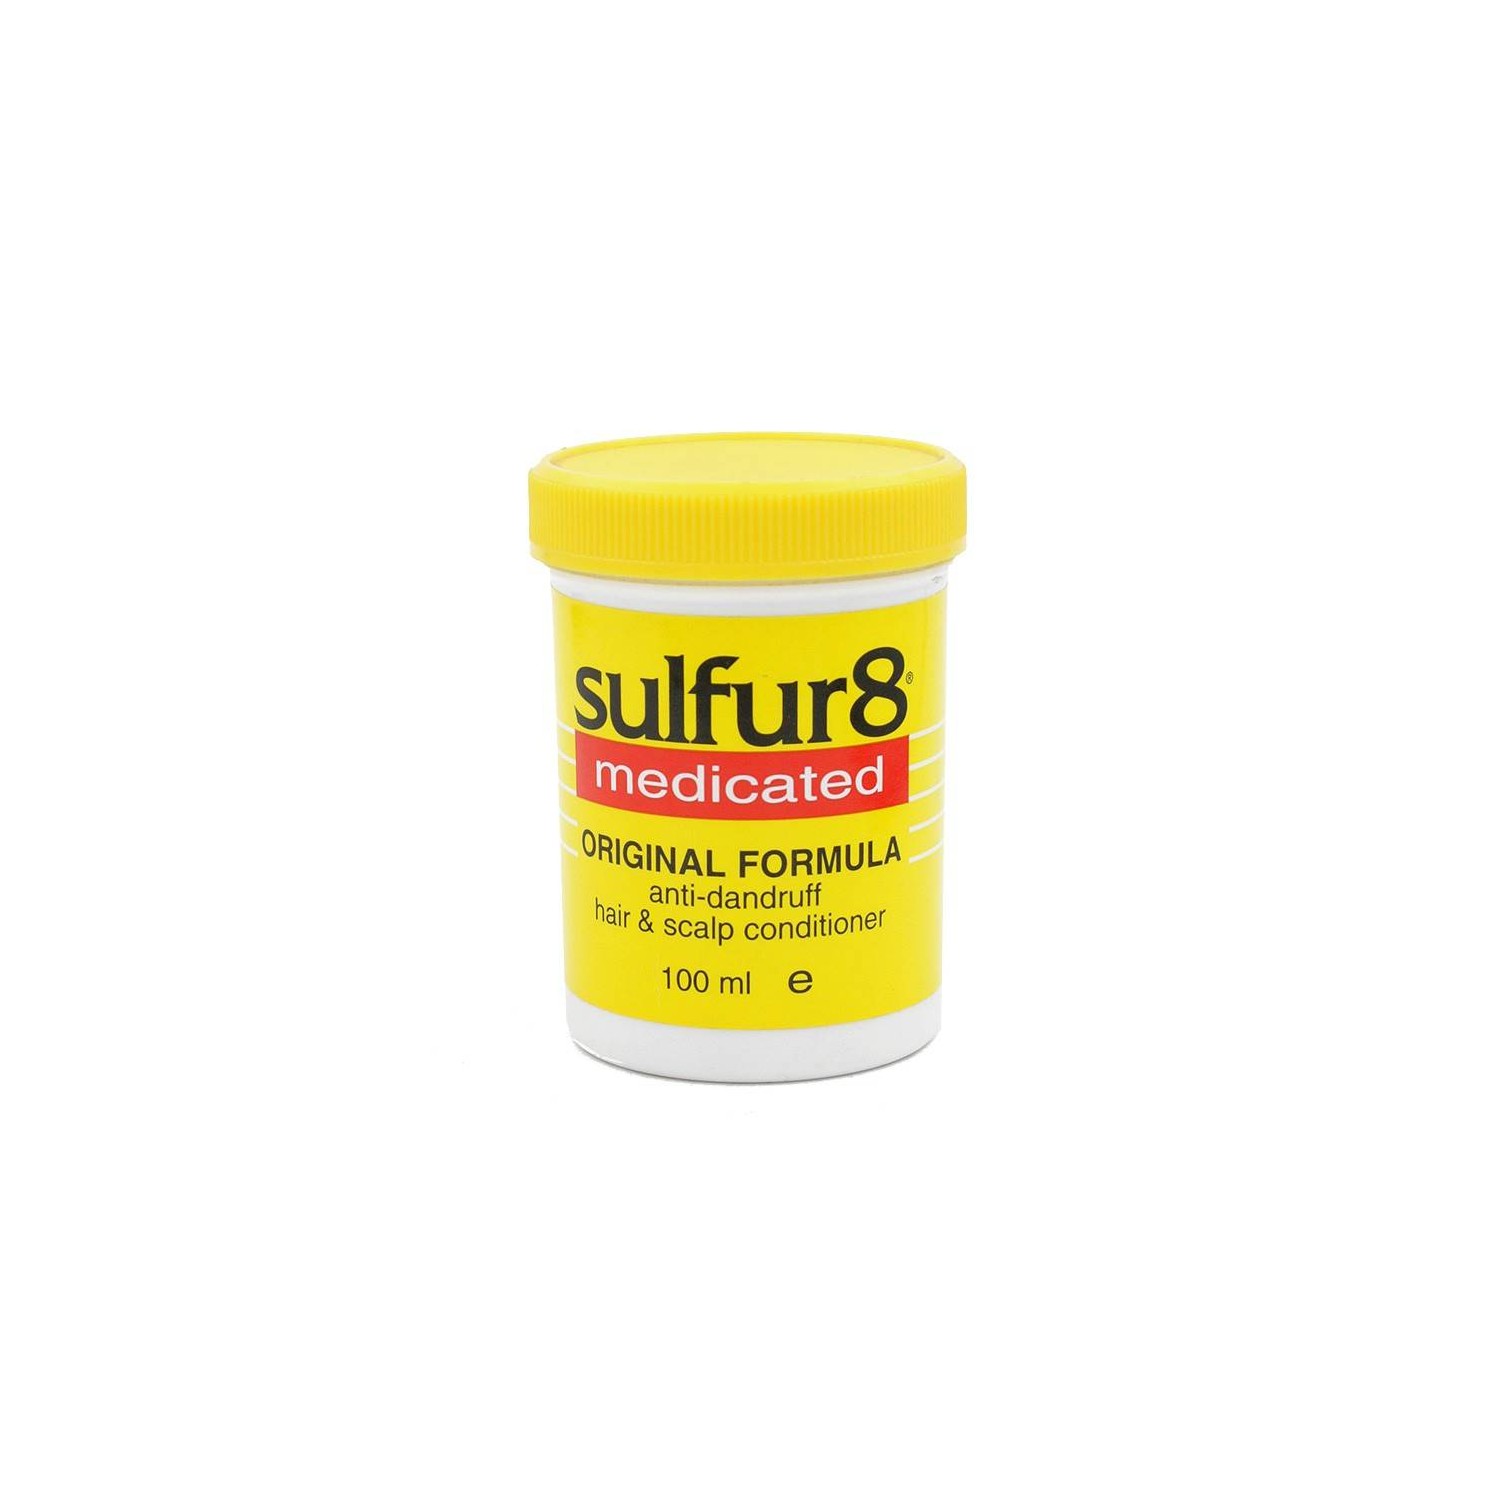 Sulfur8 Medicated Hair Scalp Conditioner 100 ml